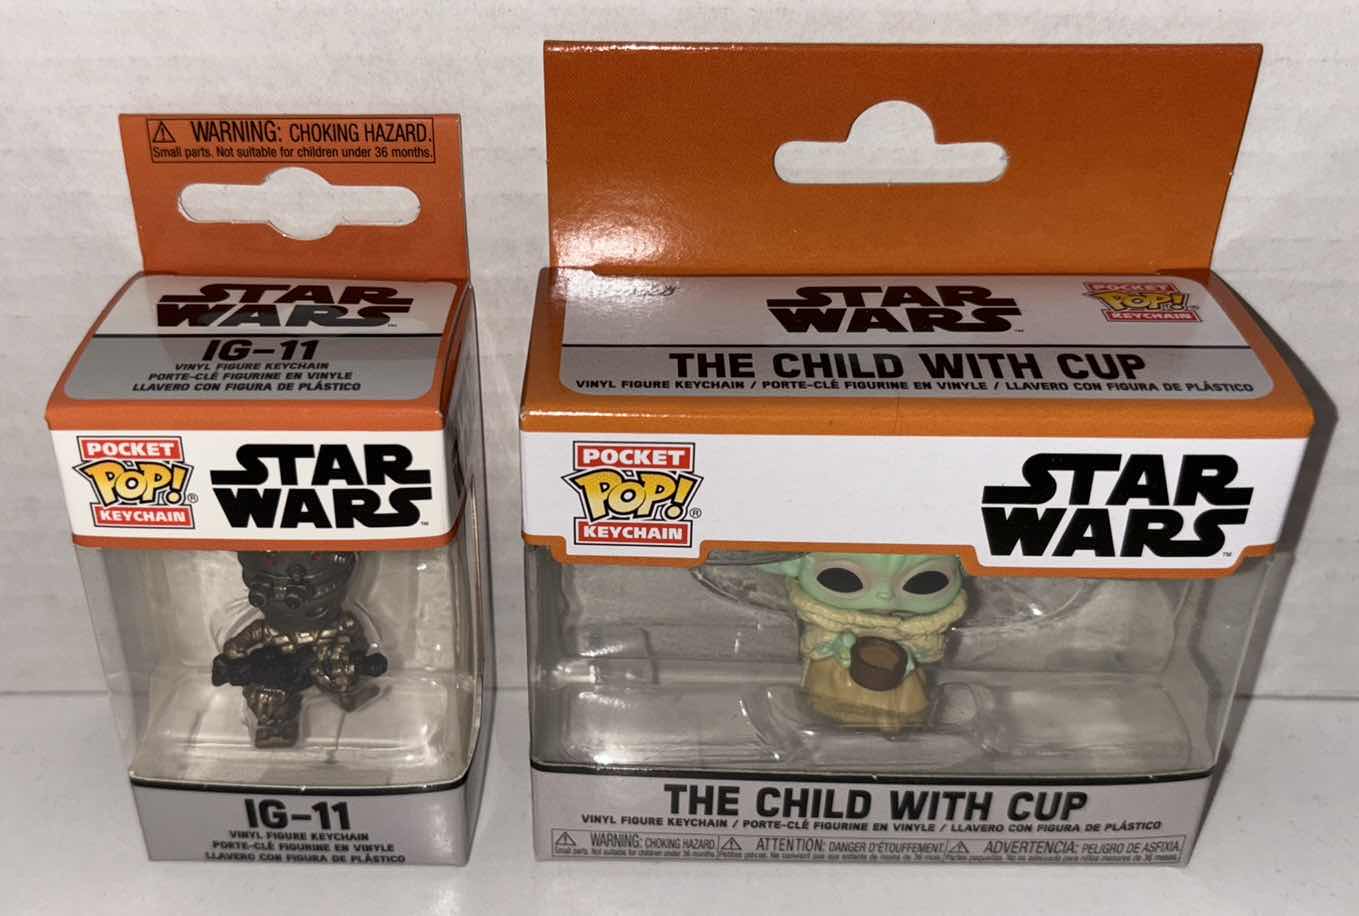 Photo 2 of NEW FUNKO POP! POCKET KEYCHAIN 2-PACK, STAR WARS “IG-11” & “THE CHILD WITH CUP” 